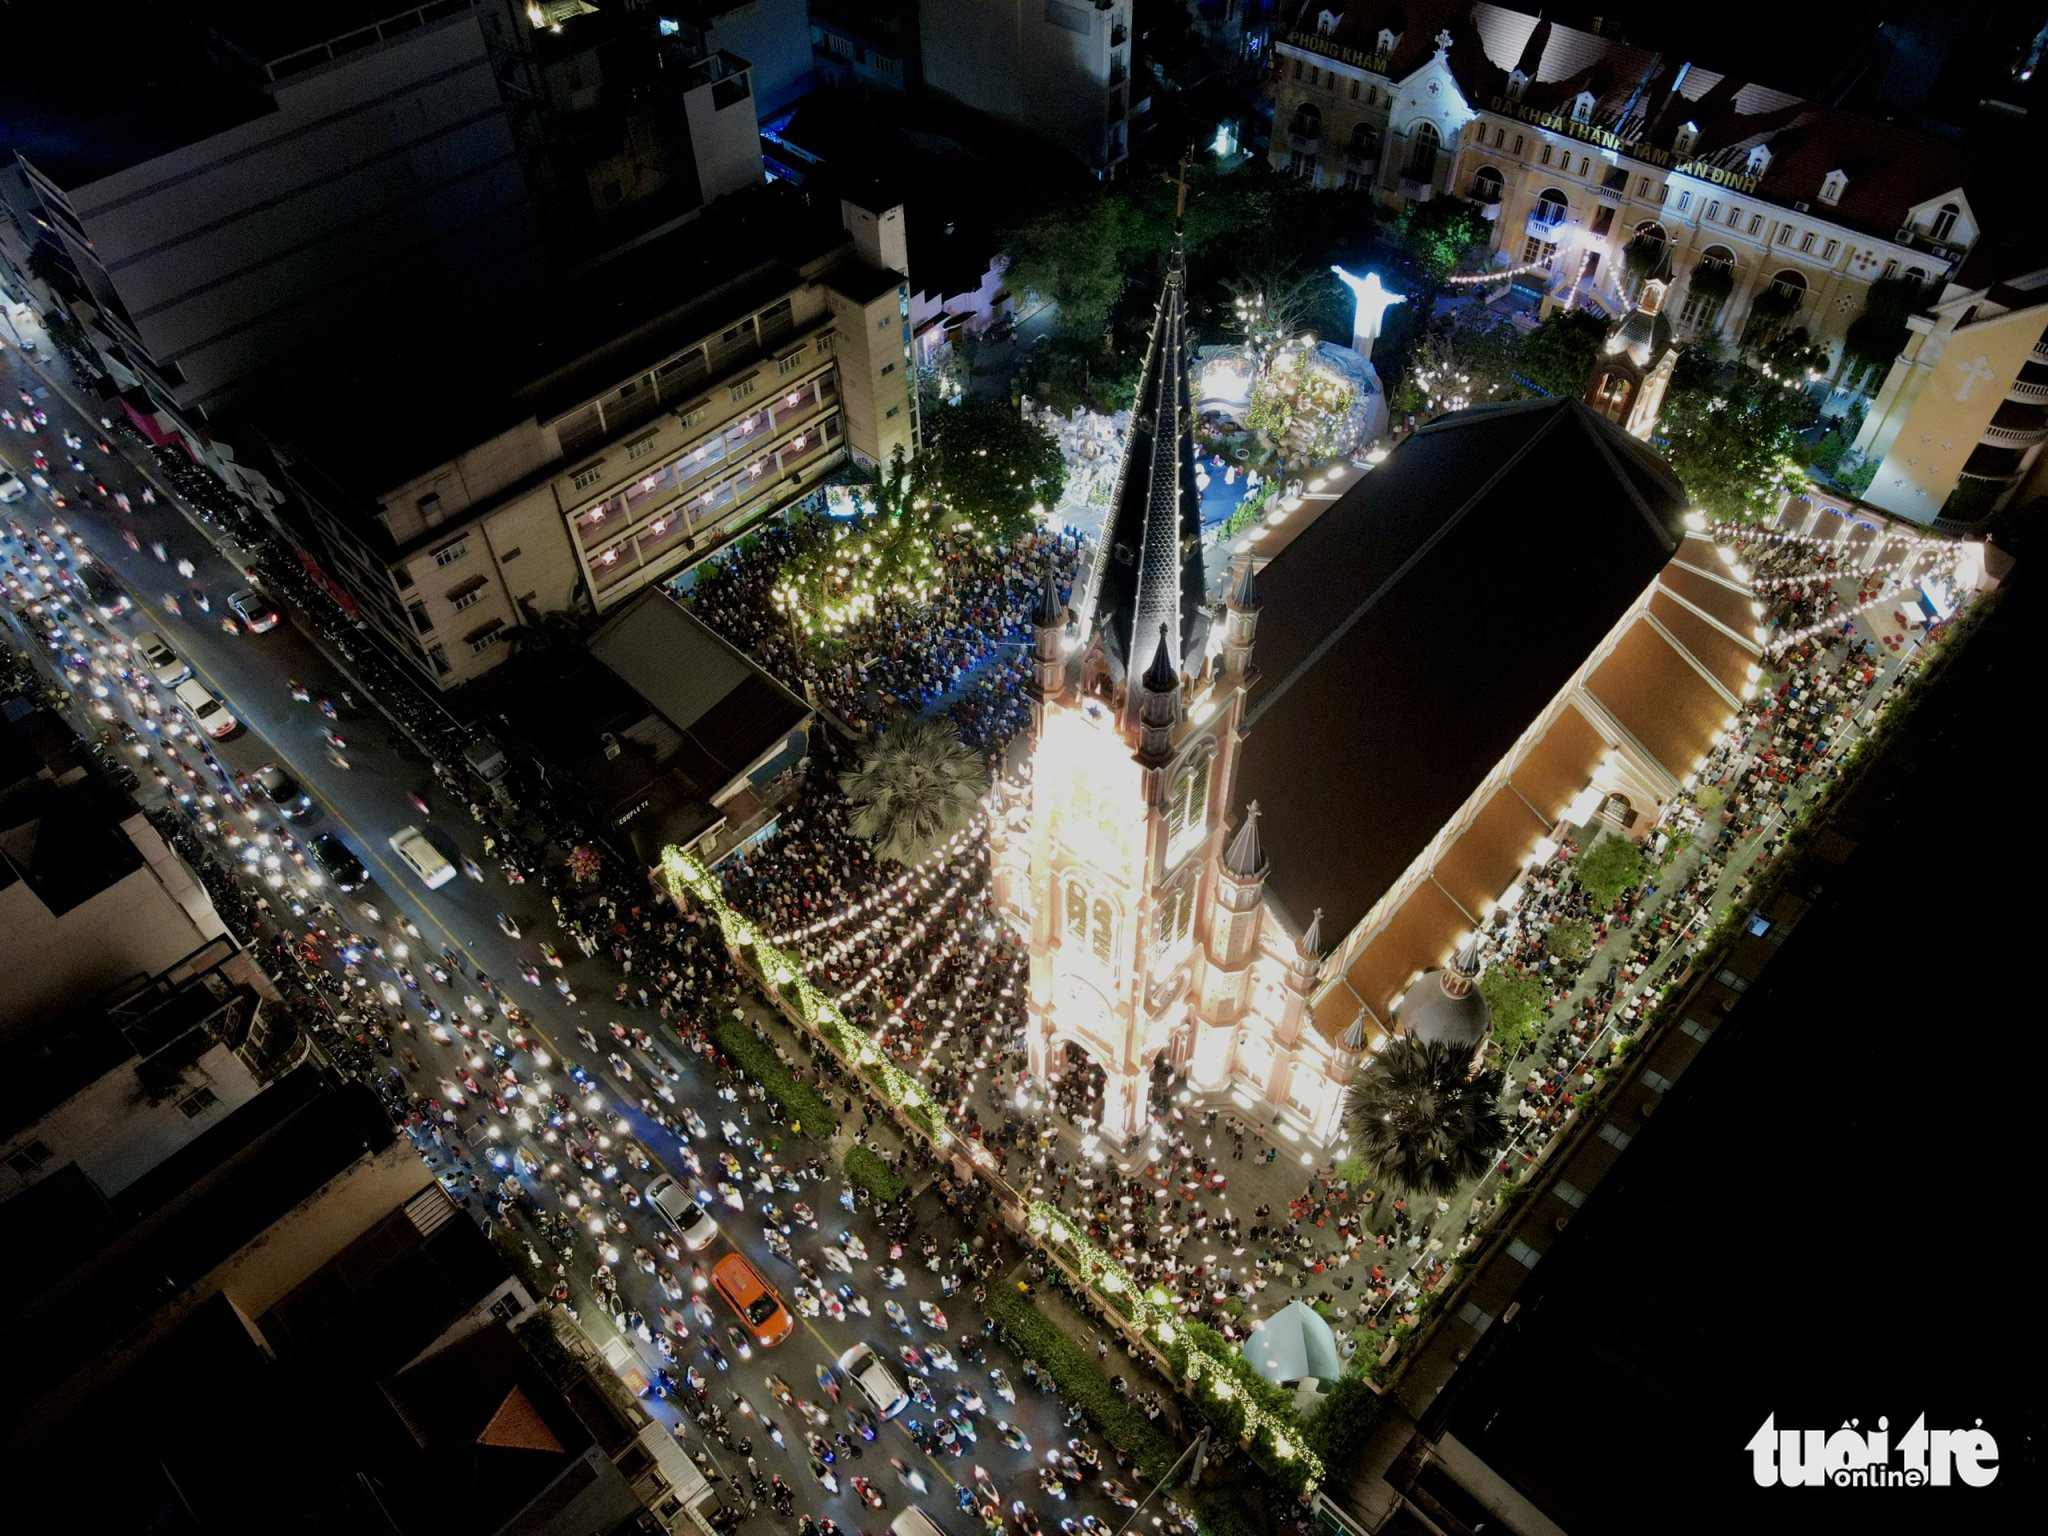 Tan Dinh Church in District 3, Ho Chi Minh City lights up on Christmas Eve, December 24, 2022. Photo: T.T.D. / Tuoi Tre